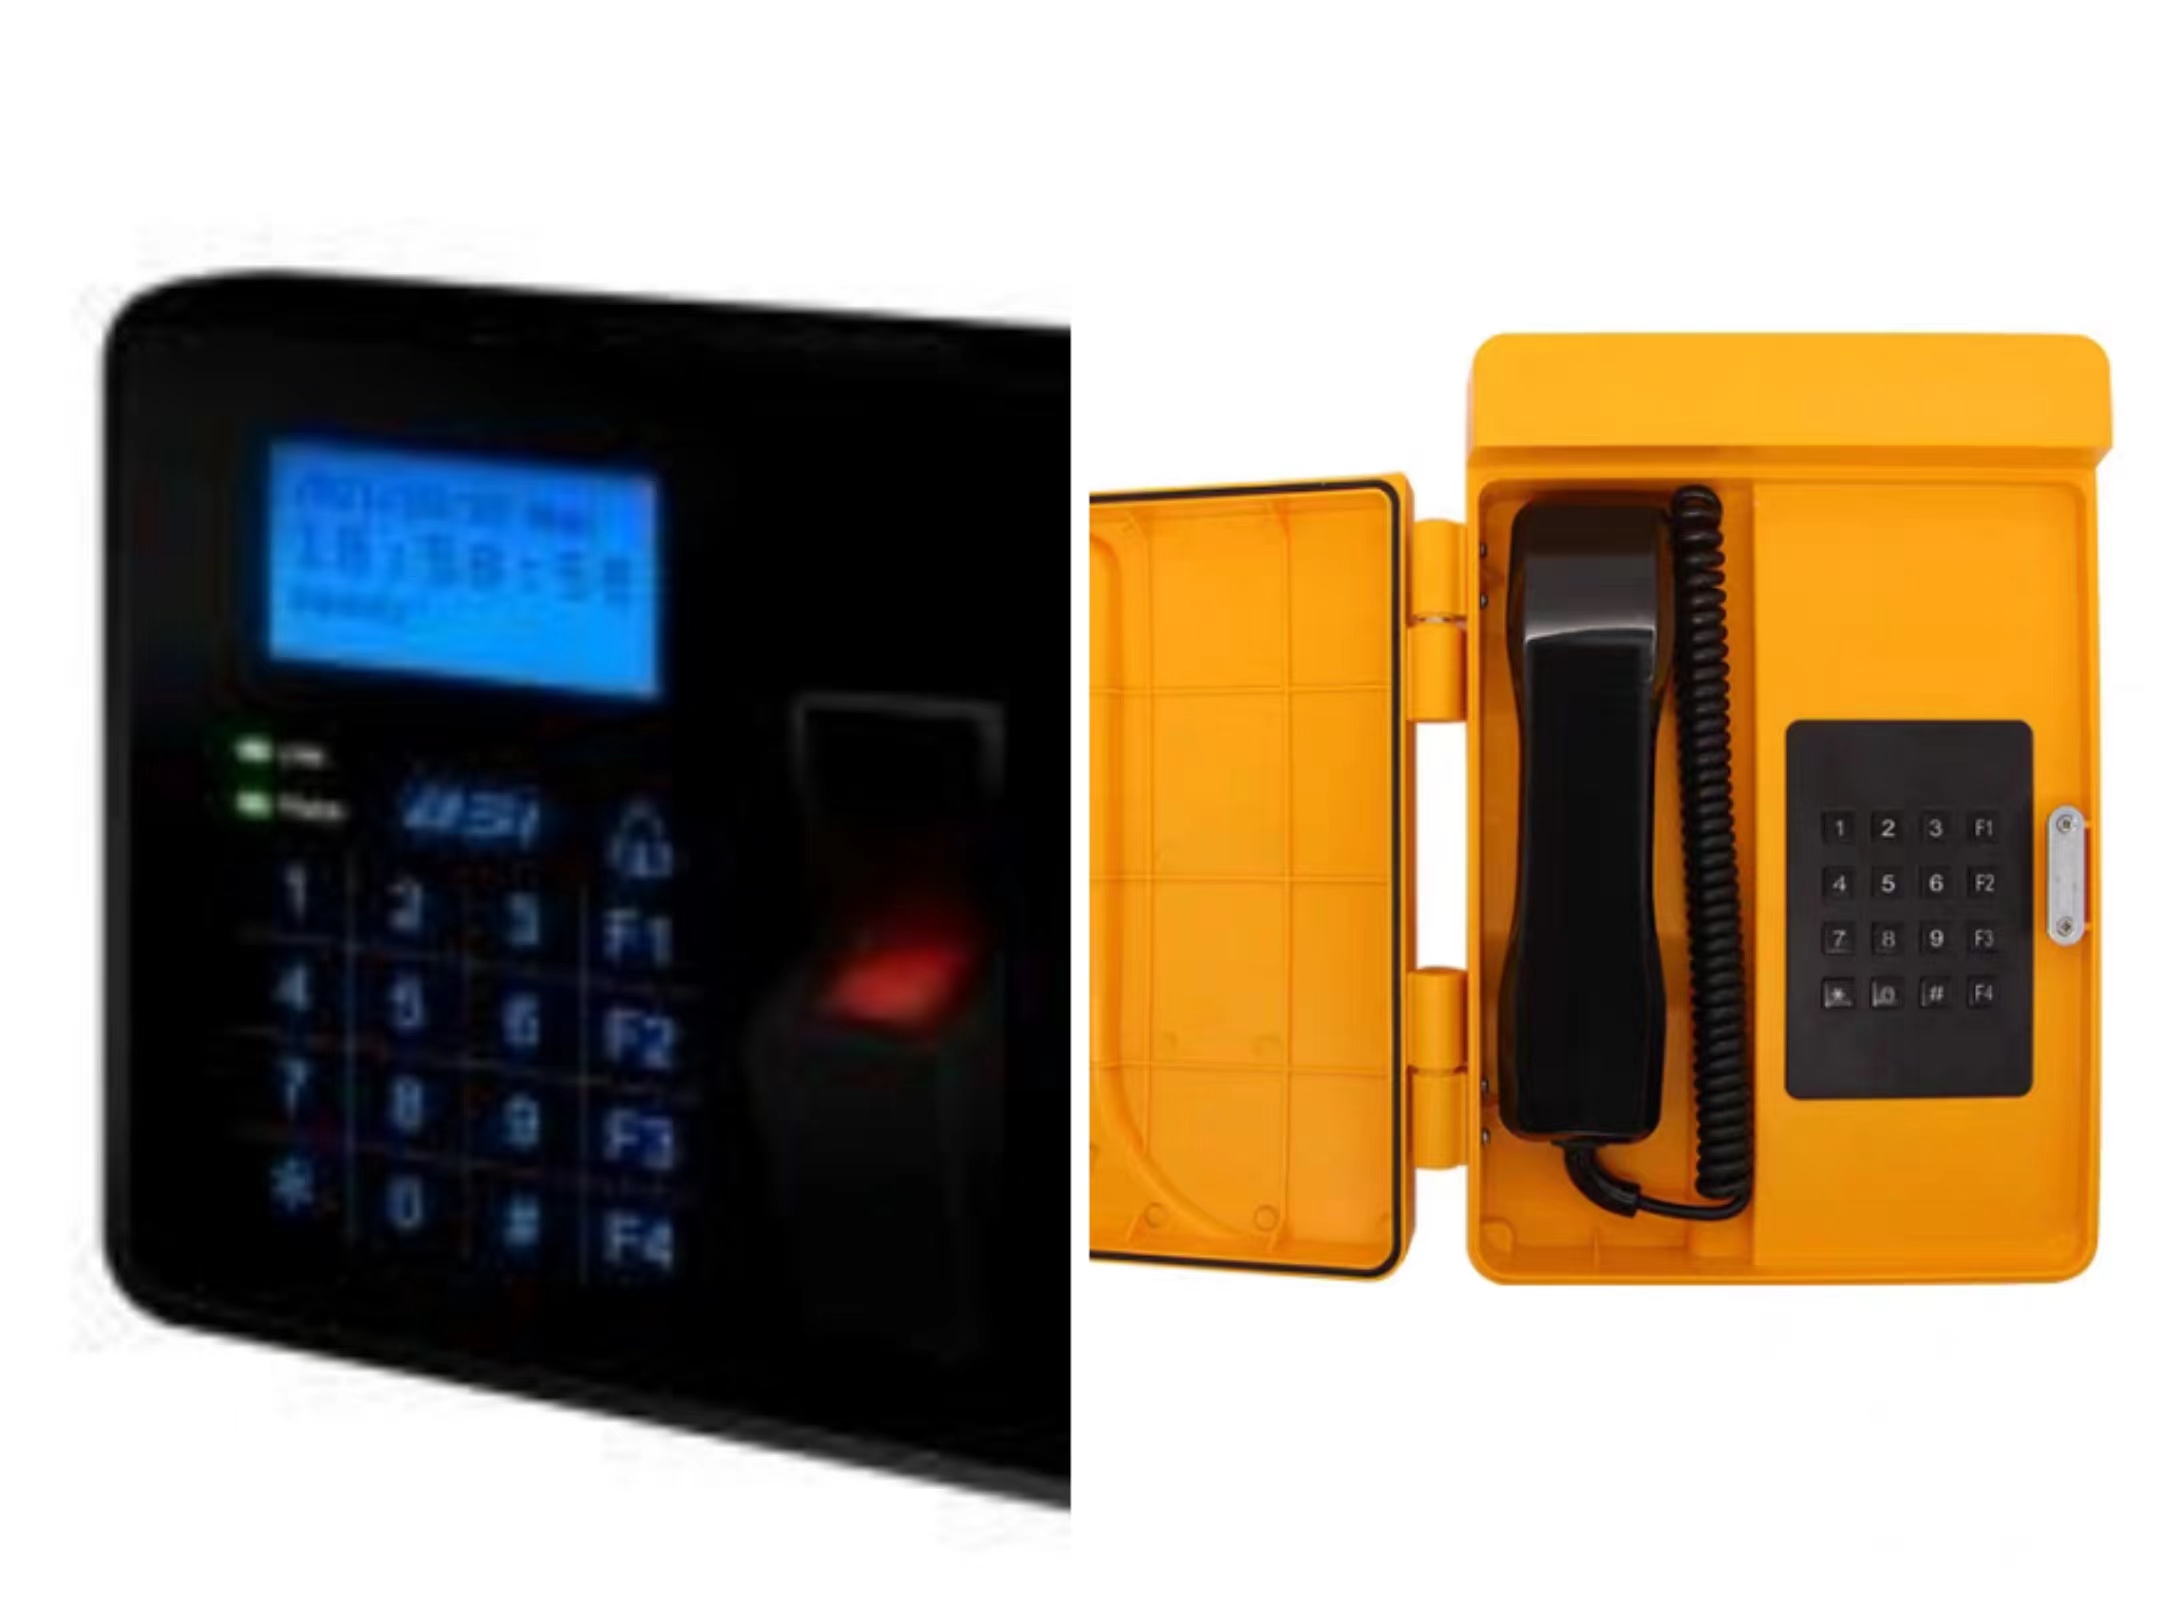 What is the secret to the success of the B706 keypad?